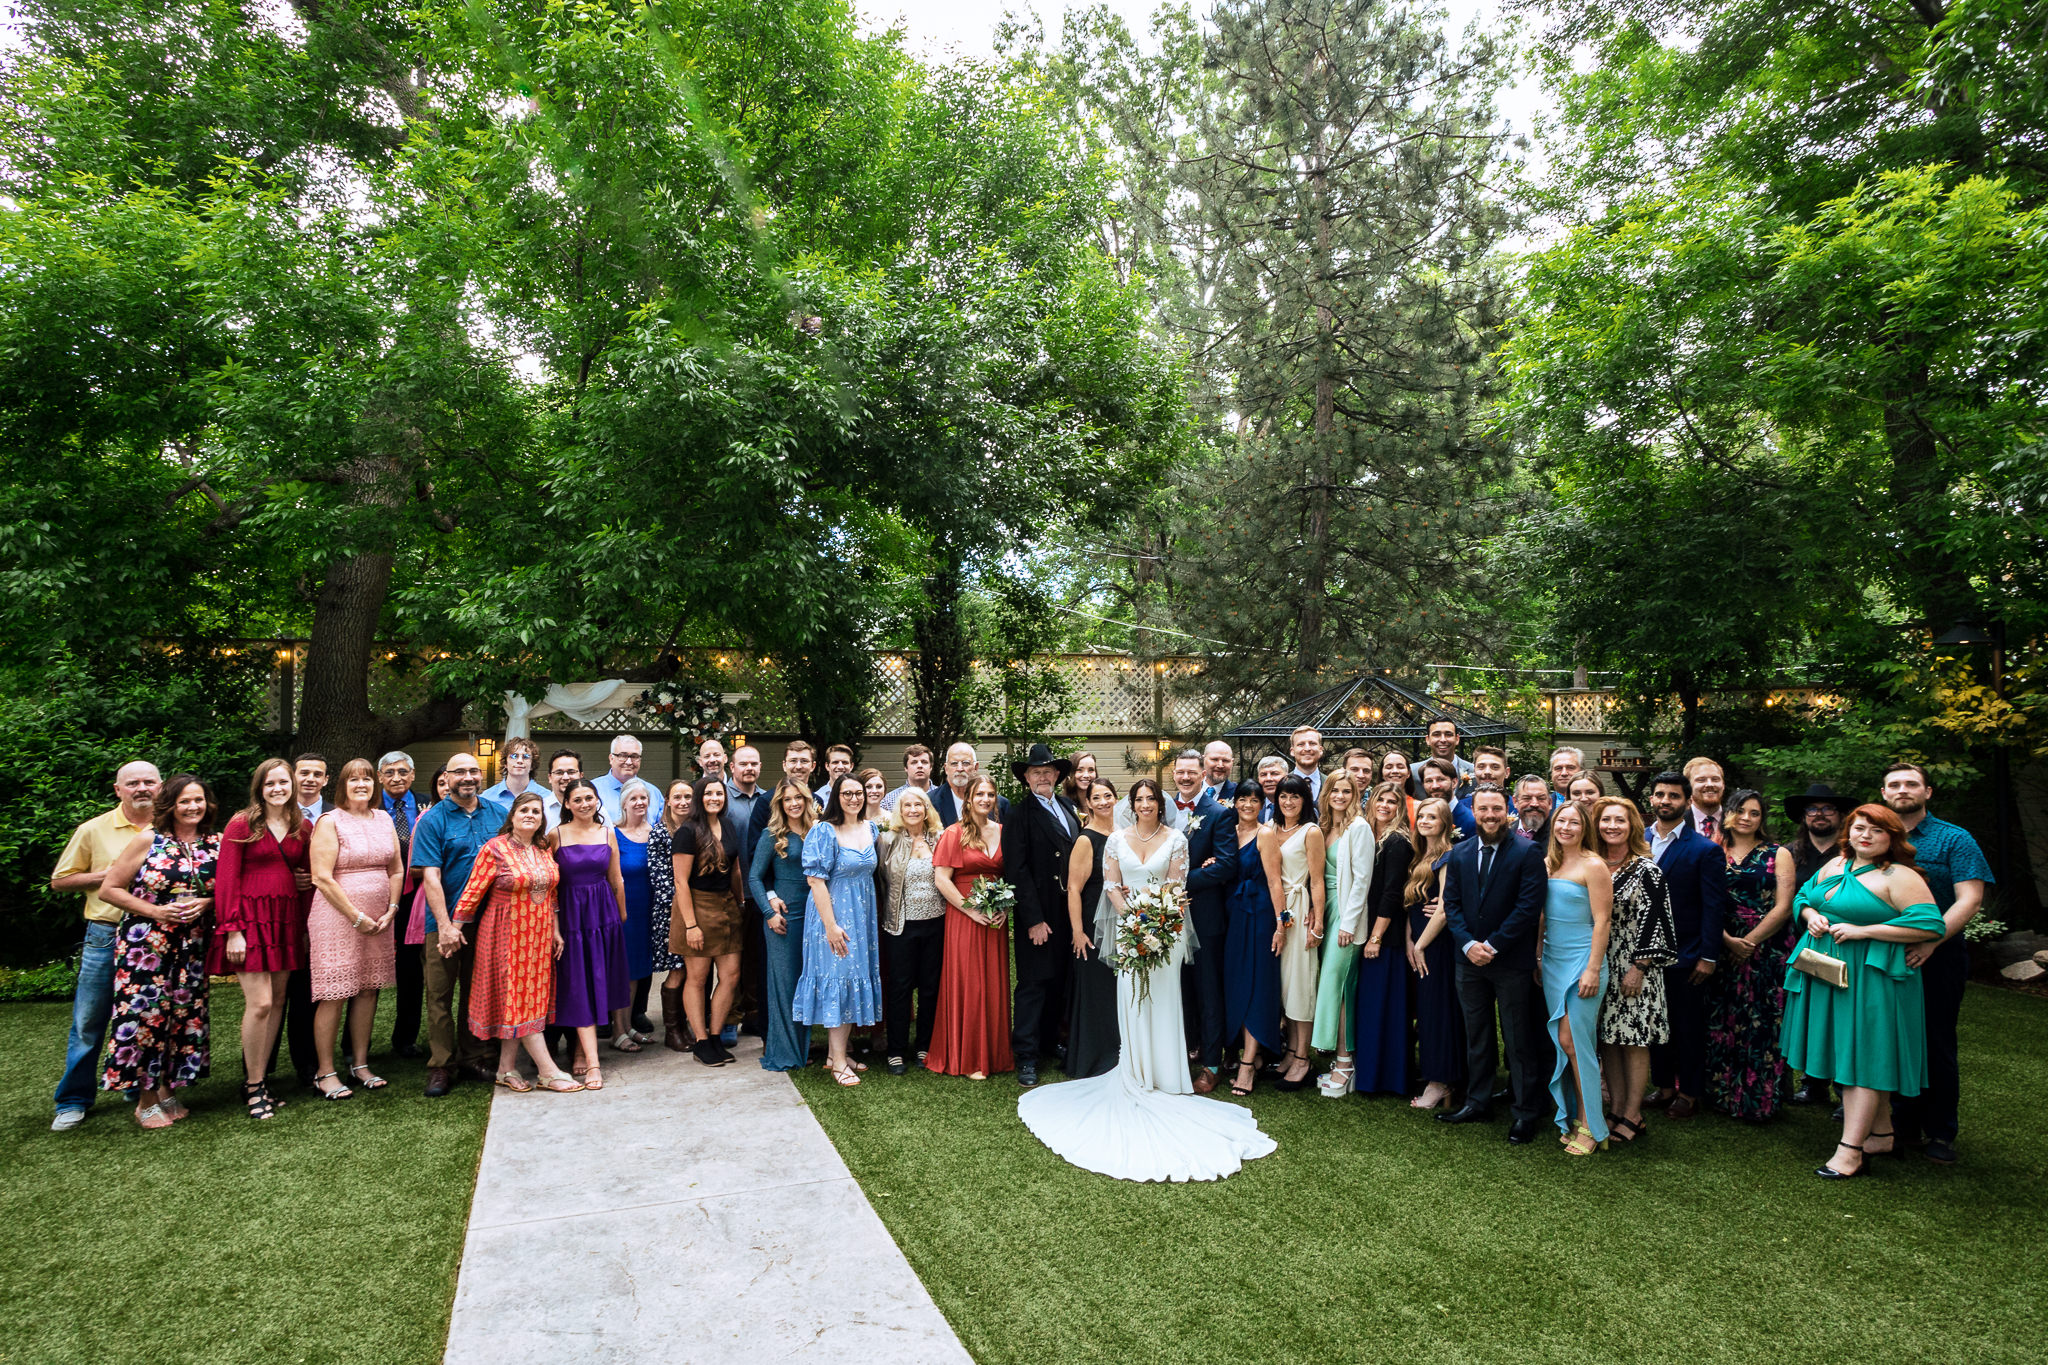 Large group photo of the Bride & Groom with all of their guests for Haley & Gytenis' Summer Wedding at The McCreery House by Colorado Wedding Photographer, Jennifer Garza.